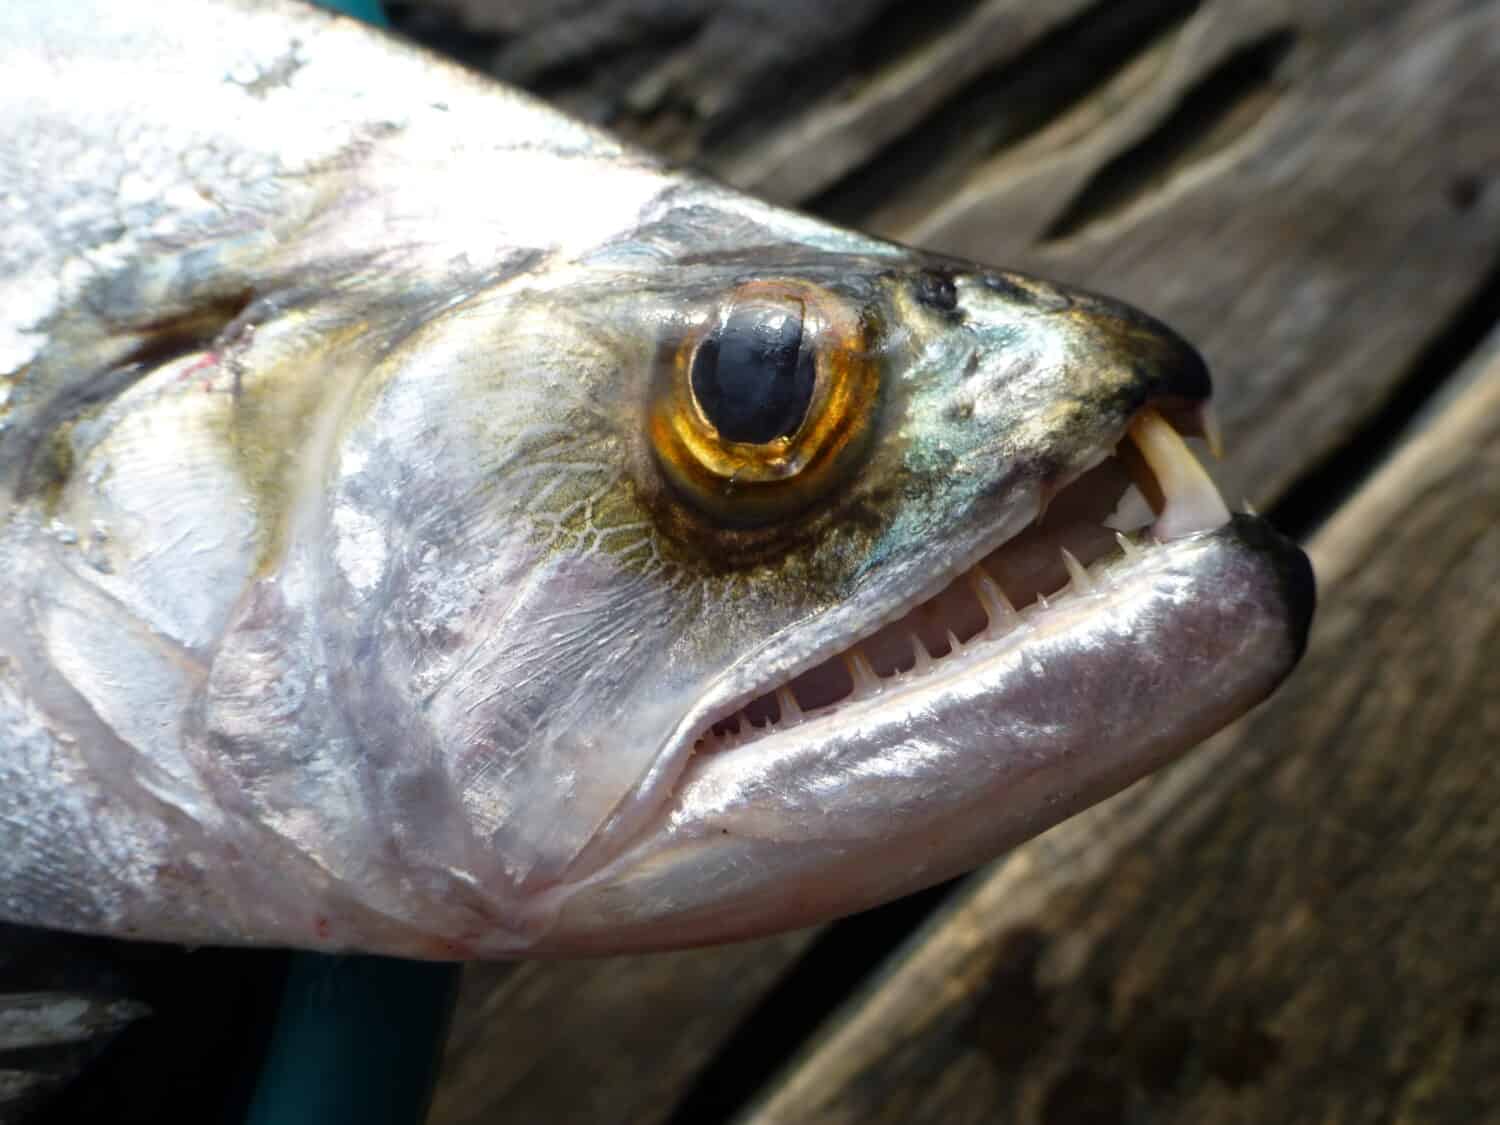  Payara, Vampire Fish, scientifically known as Hydrolycus scomberoides, is a type of game fish. It is found abundantly in Venezuela and in the Amazon basin. 